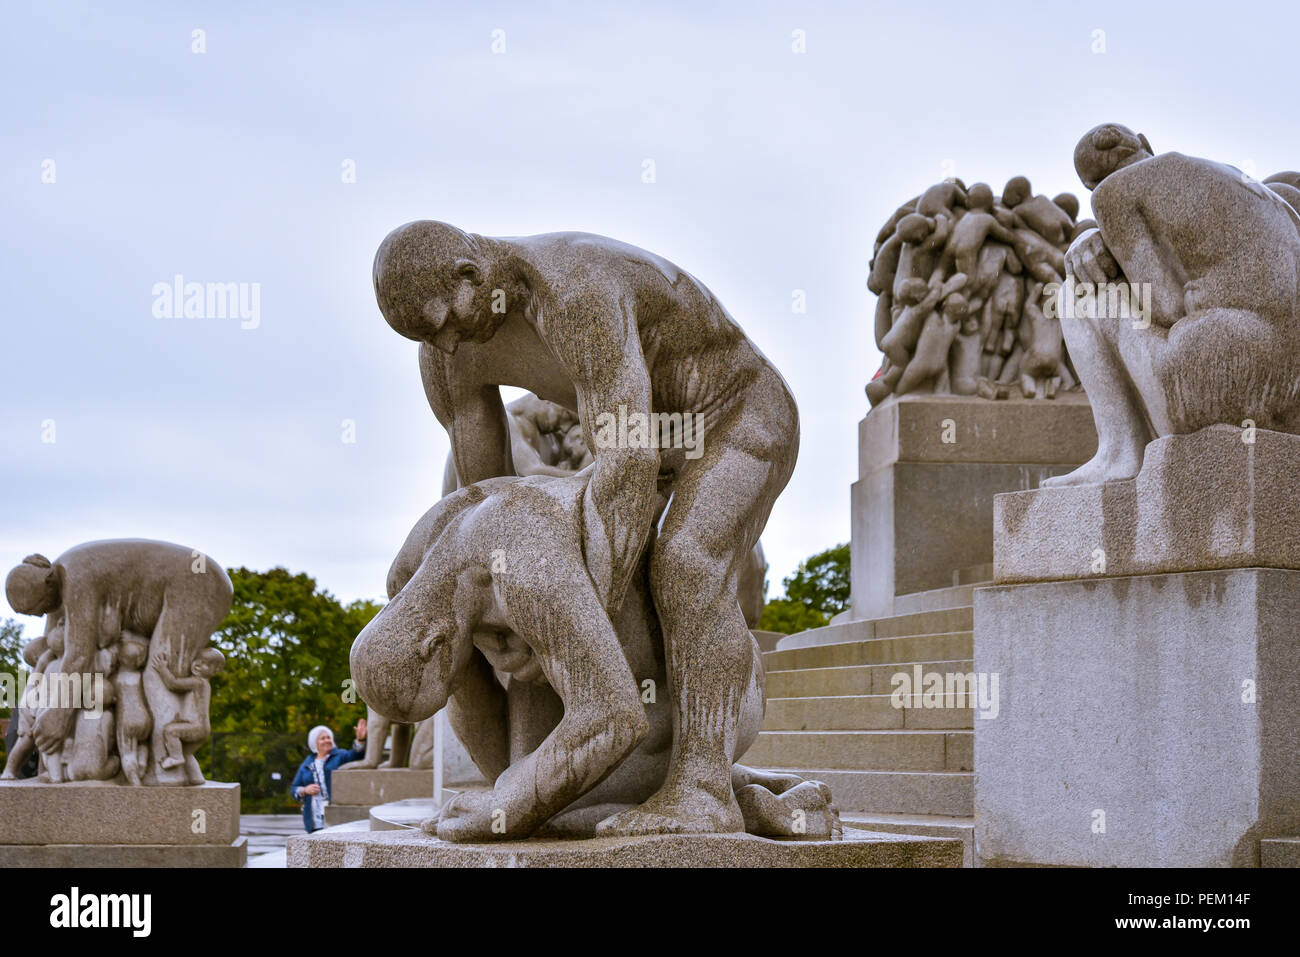 Oslo, Norway - Aug. 12, 2018: Sculptures by Gustav Vigeland (1869-1943), a renowned Norwegian sculptor, Frogner Park, Oslo. Stock Photo